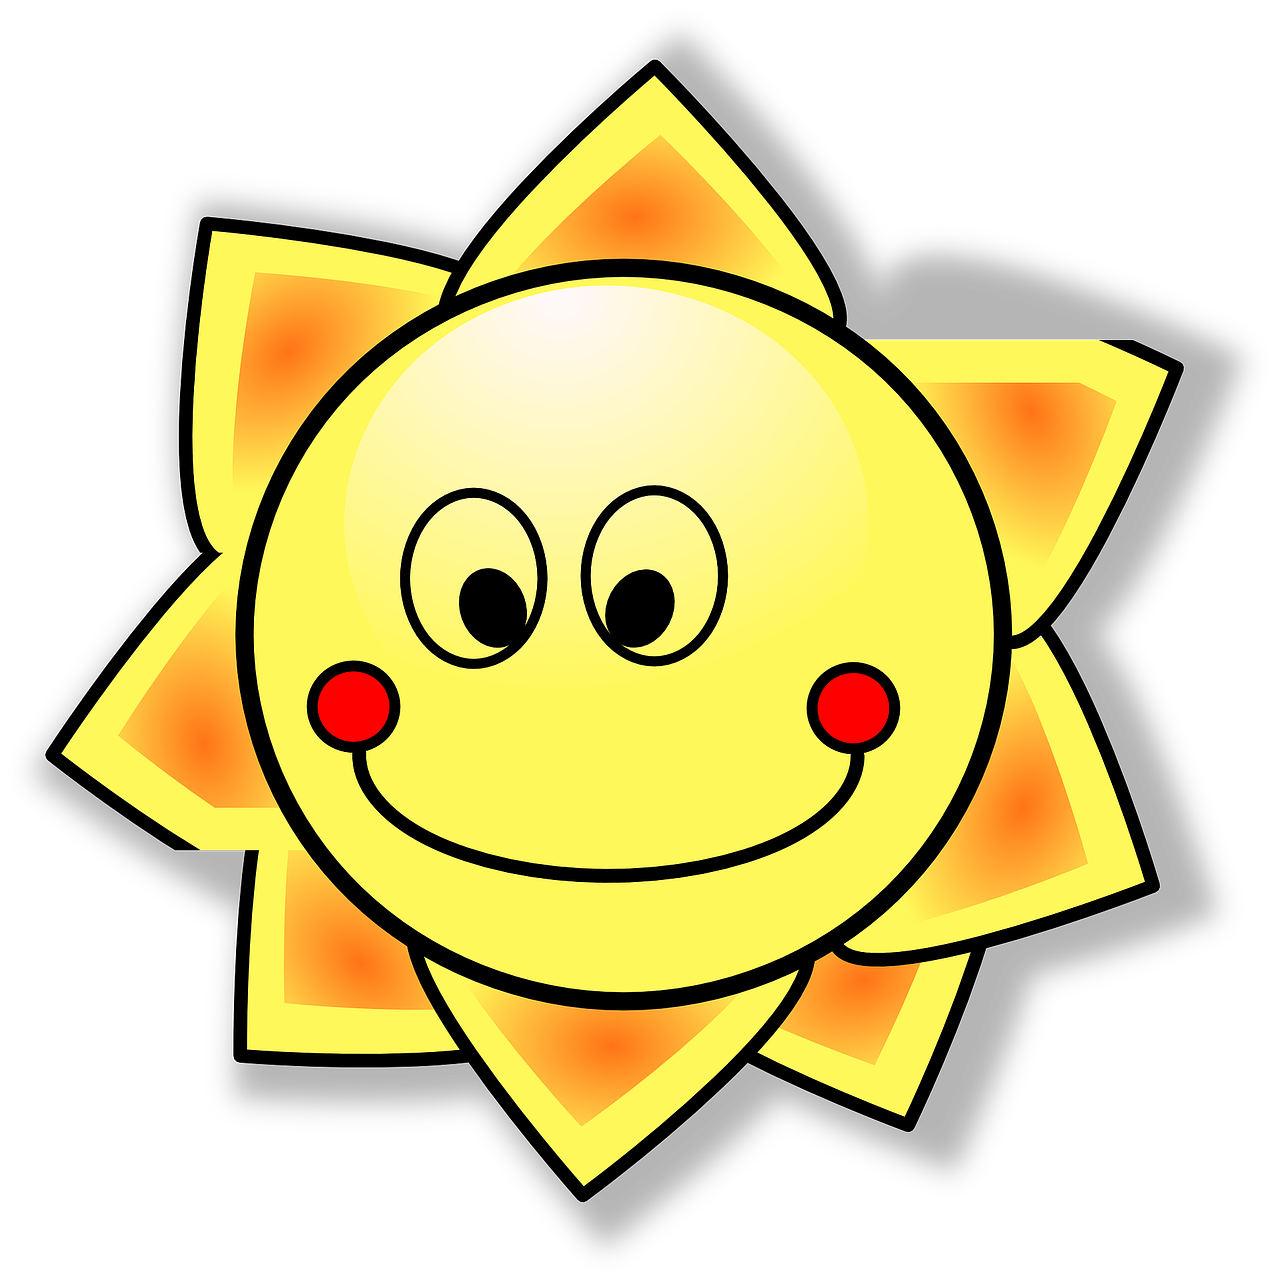 a smiling sun on a black background, a picture, cel shaded!!!, link, kid, cartoonish cute